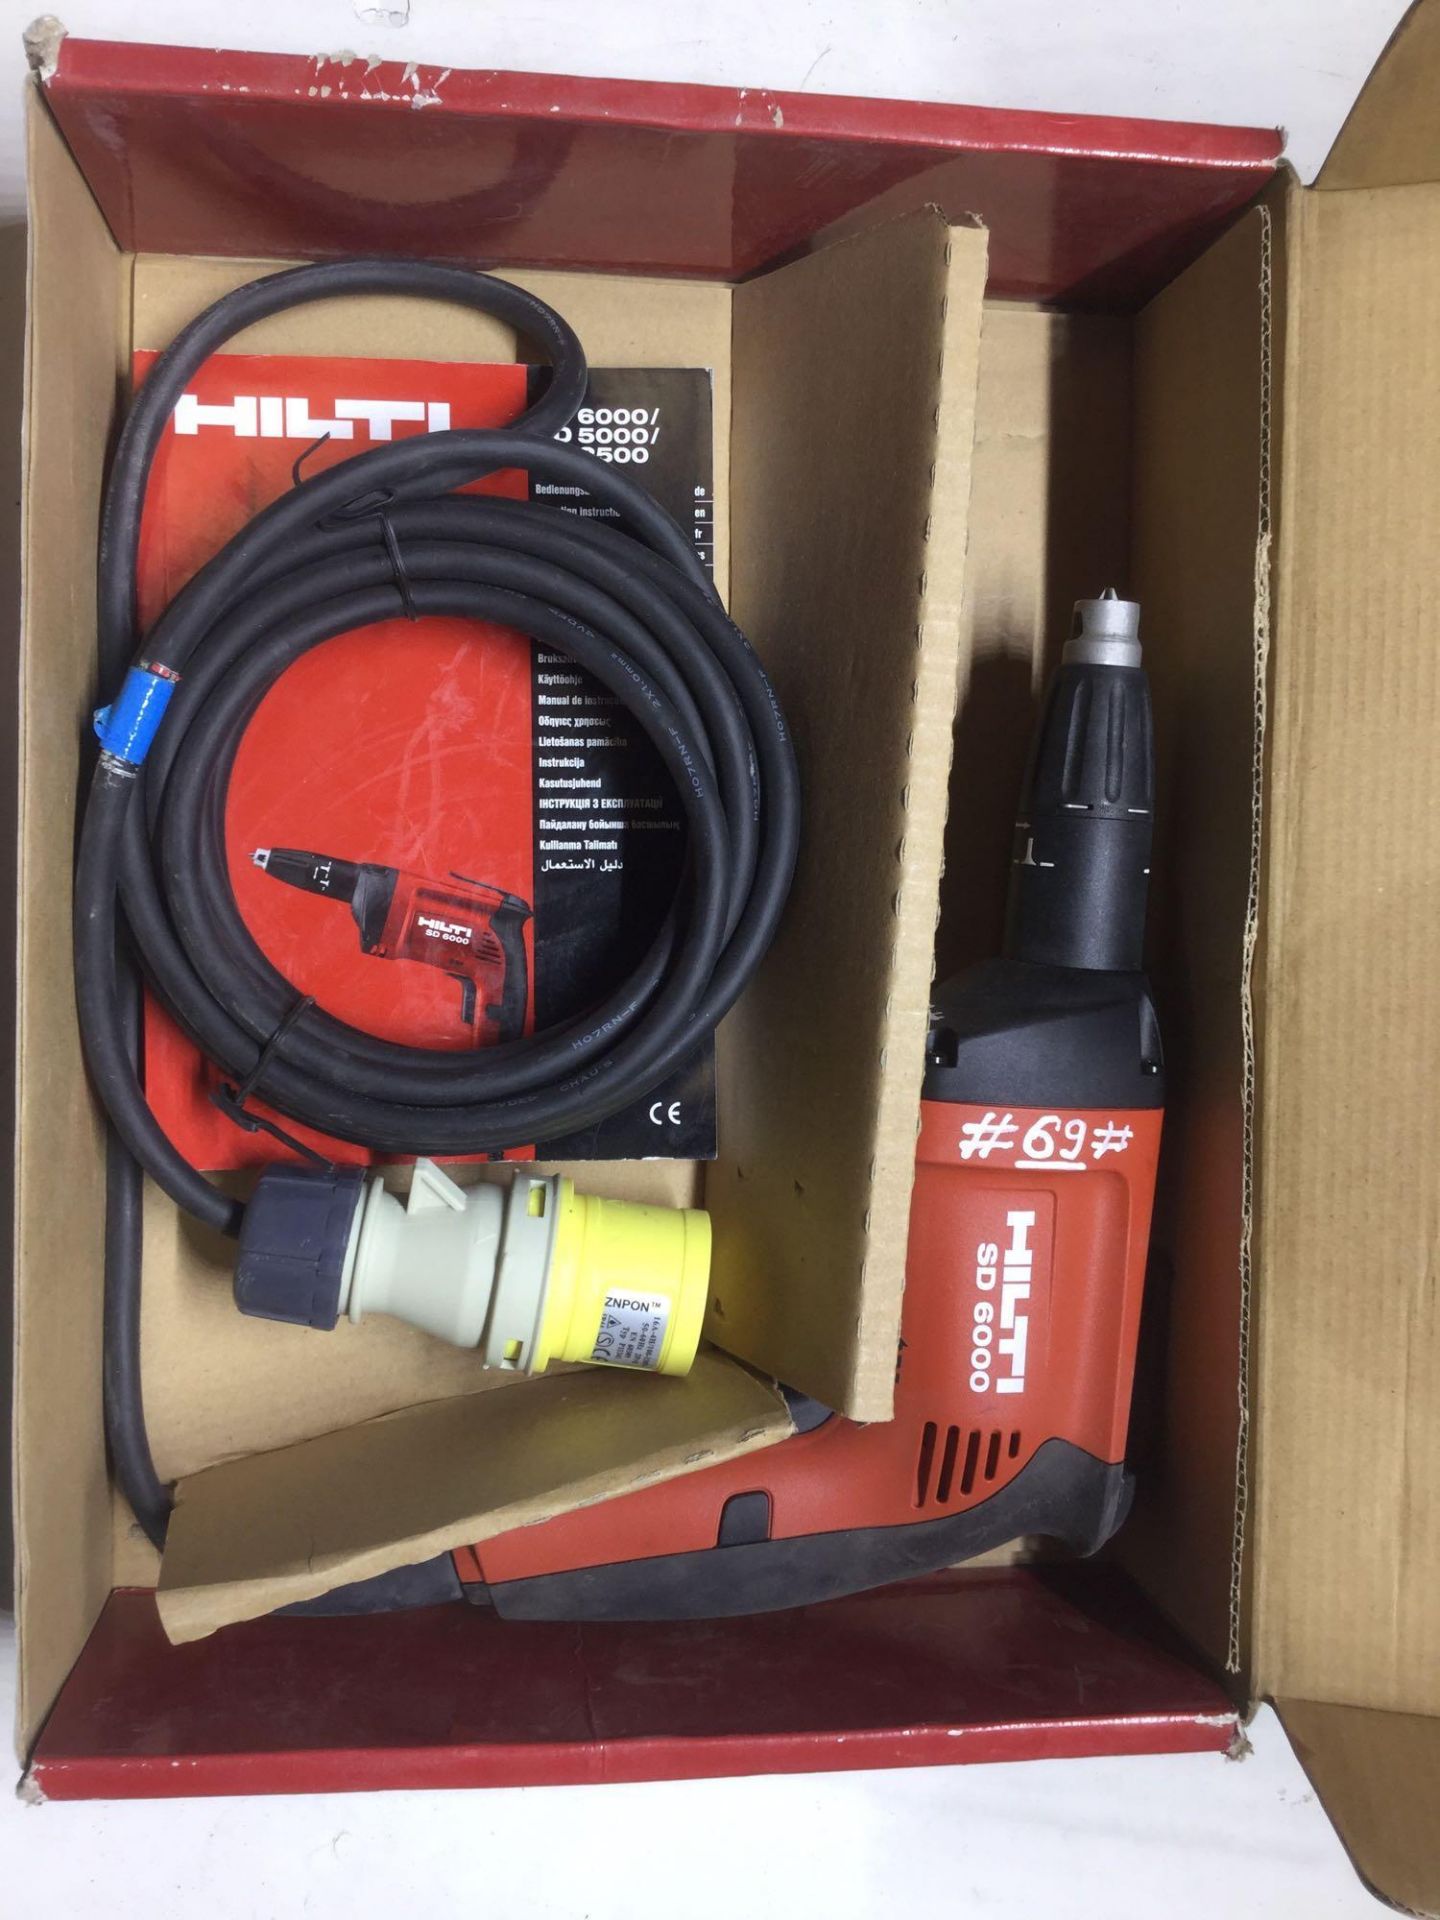 Hilti SD 6000 drywall screw driver 110volt - Image 2 of 2